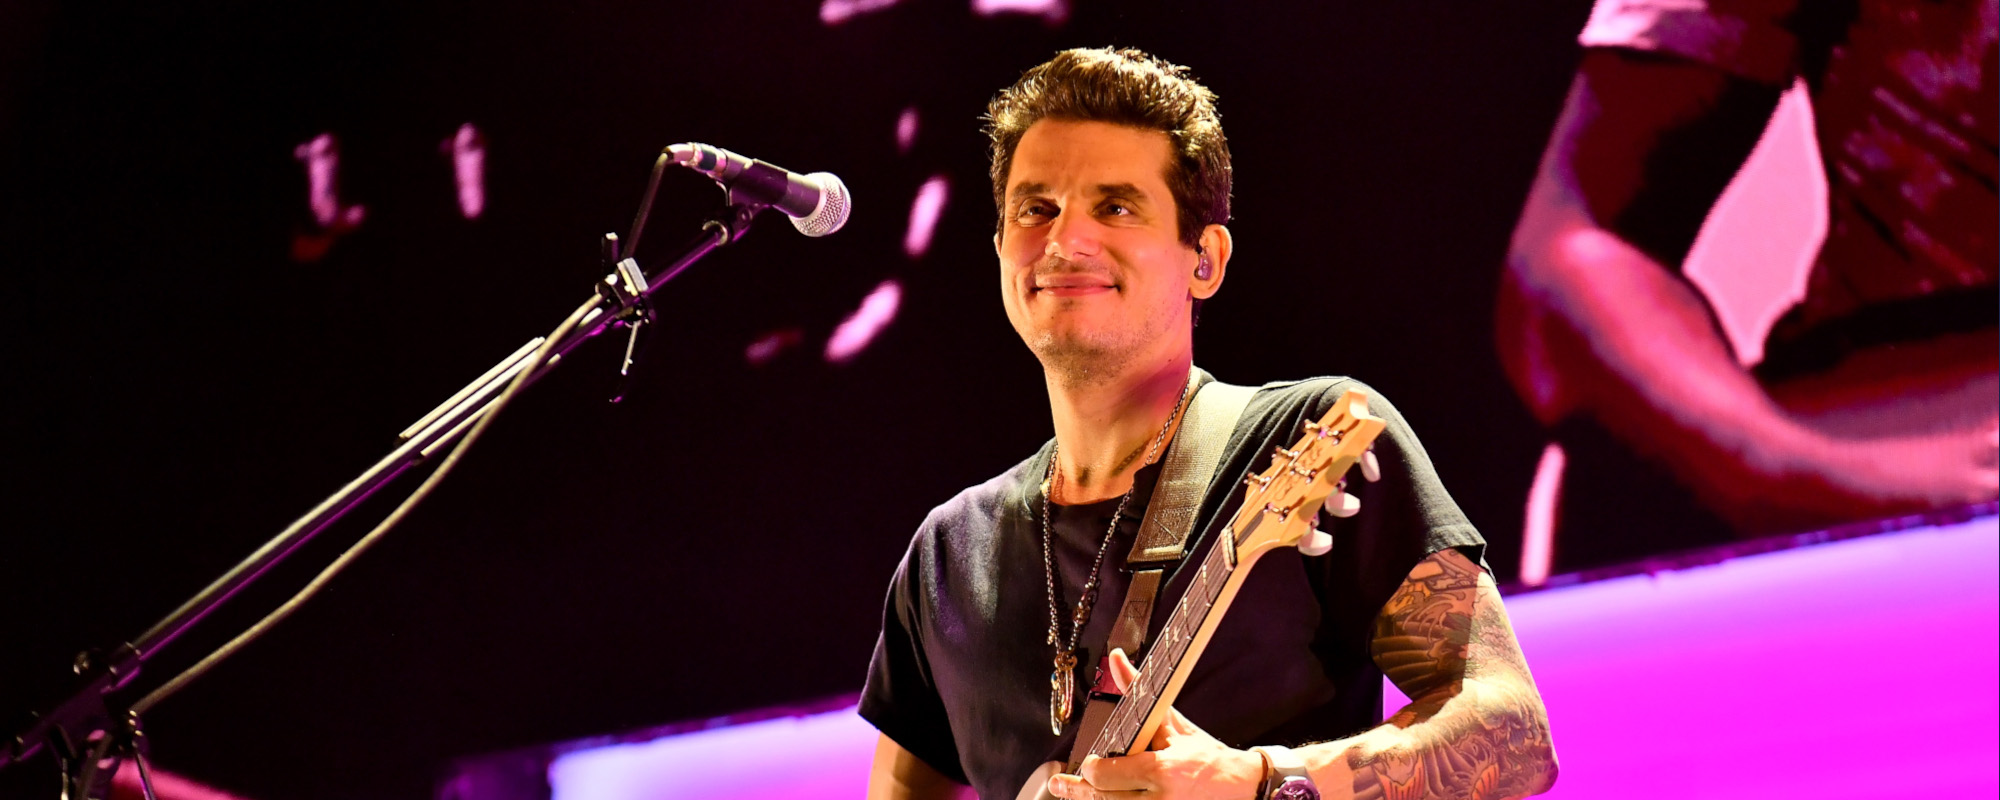 To Honor the Late Betty White, John Mayer Performs ‘Golden Girls’ Theme, ‘Thank You For Being A Friend’